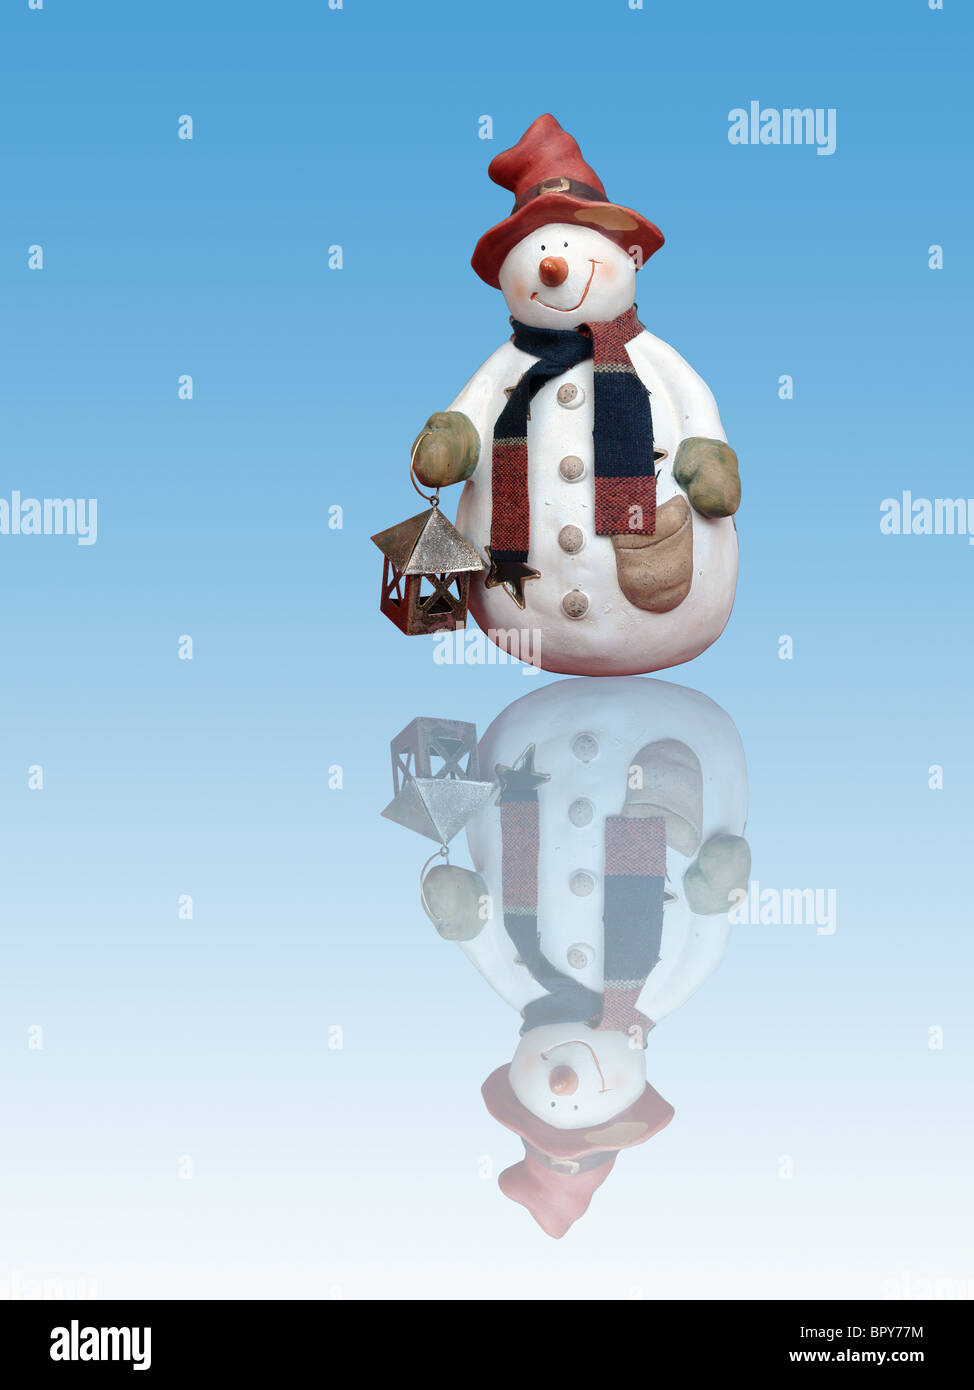 Snowman with red hat holding small lantern, reflecting in blue ice floe Stock Photo